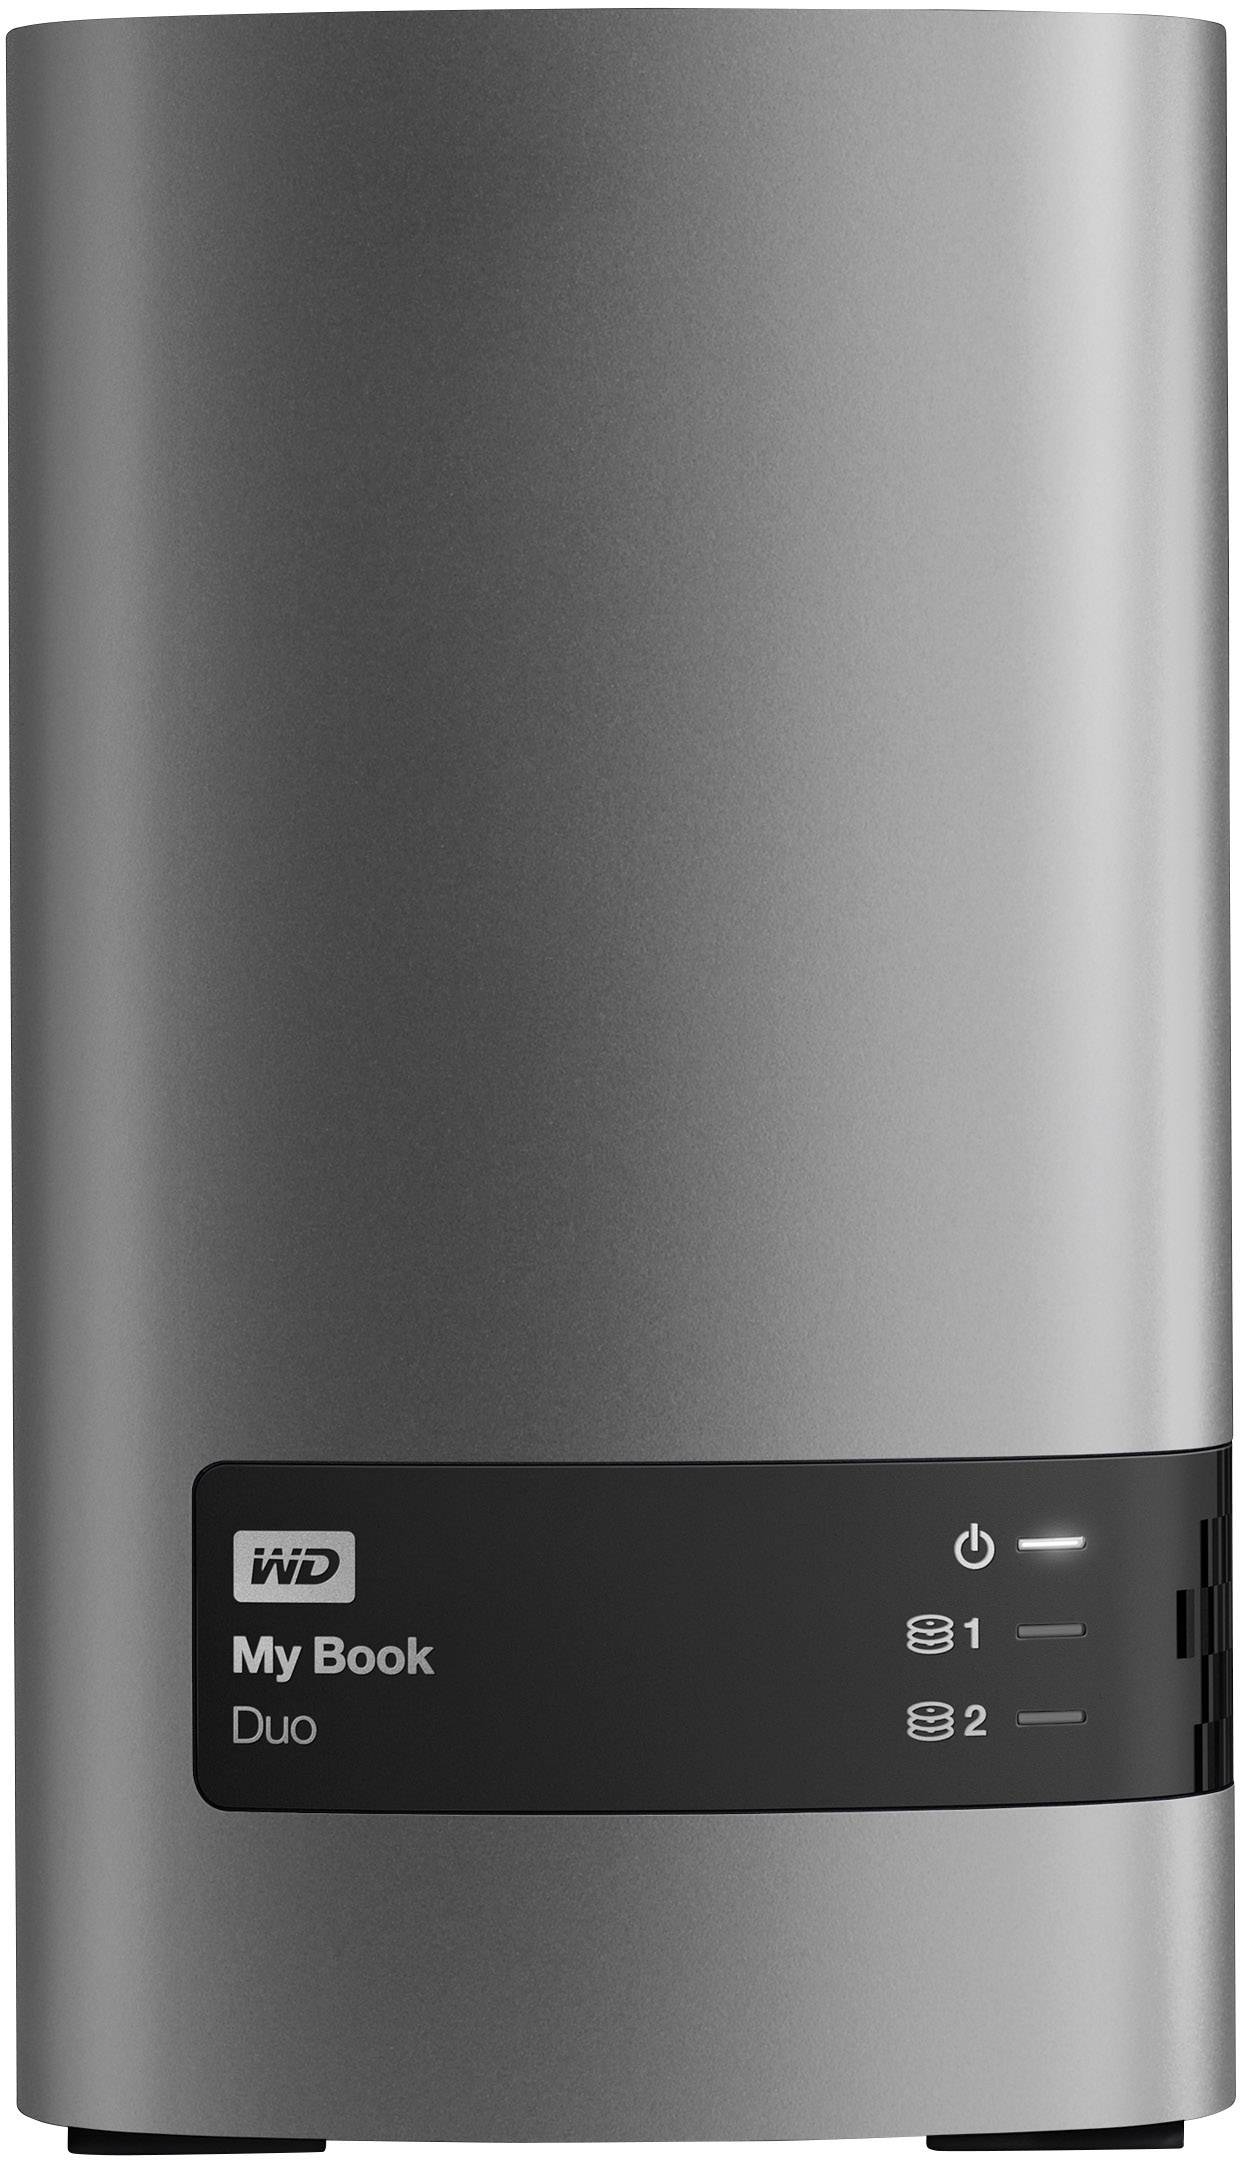 wd my book external hard drive 8tb work with ps4